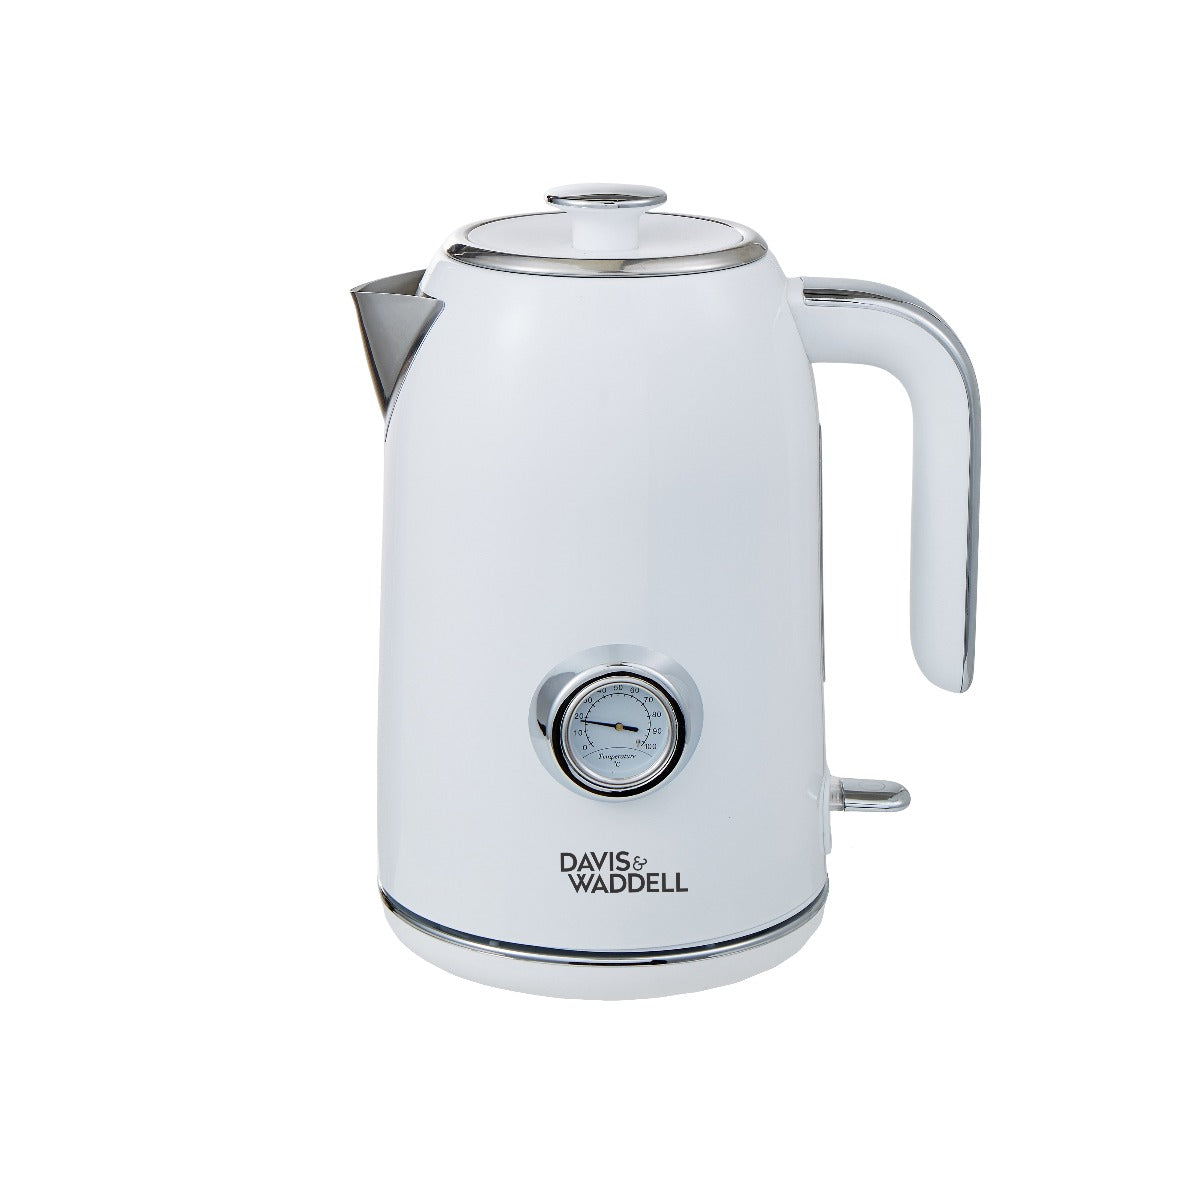 Manor Electric Kettle 1.7 litre White